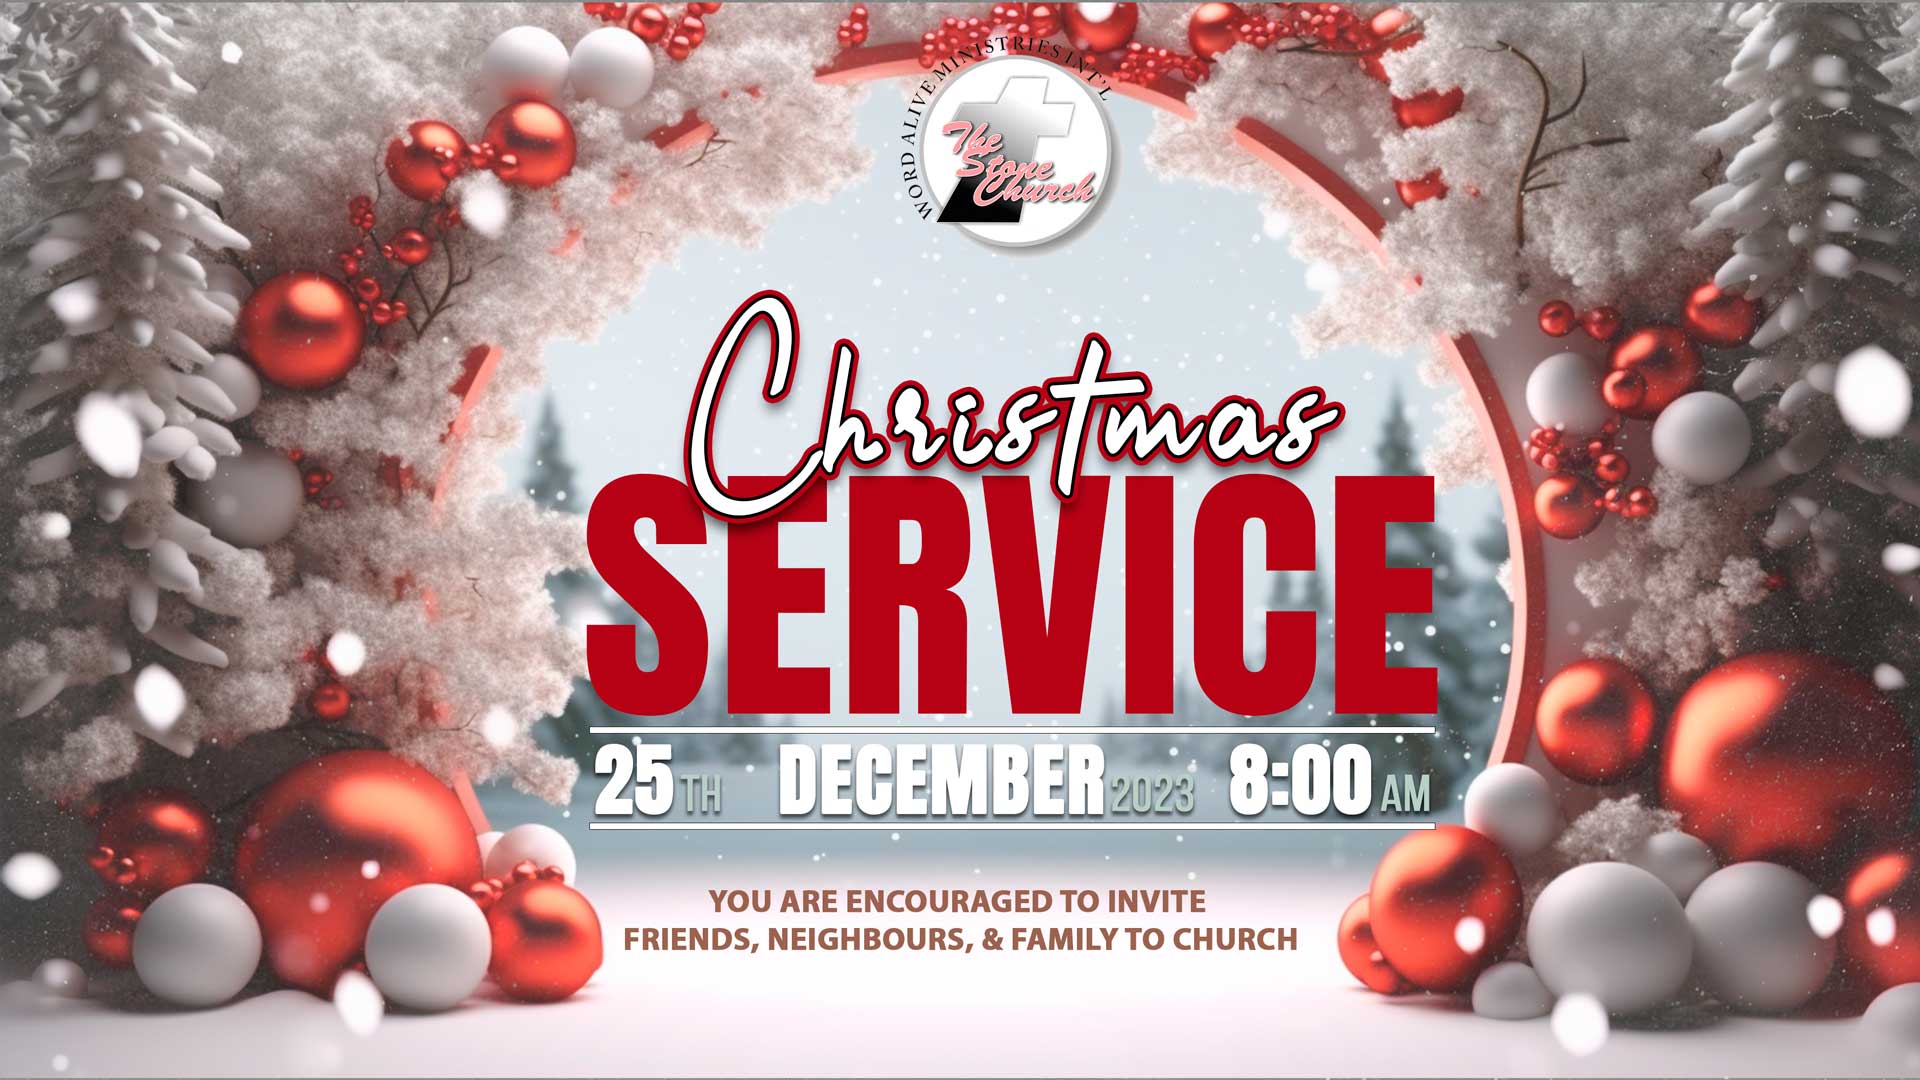 Special Christmas Service